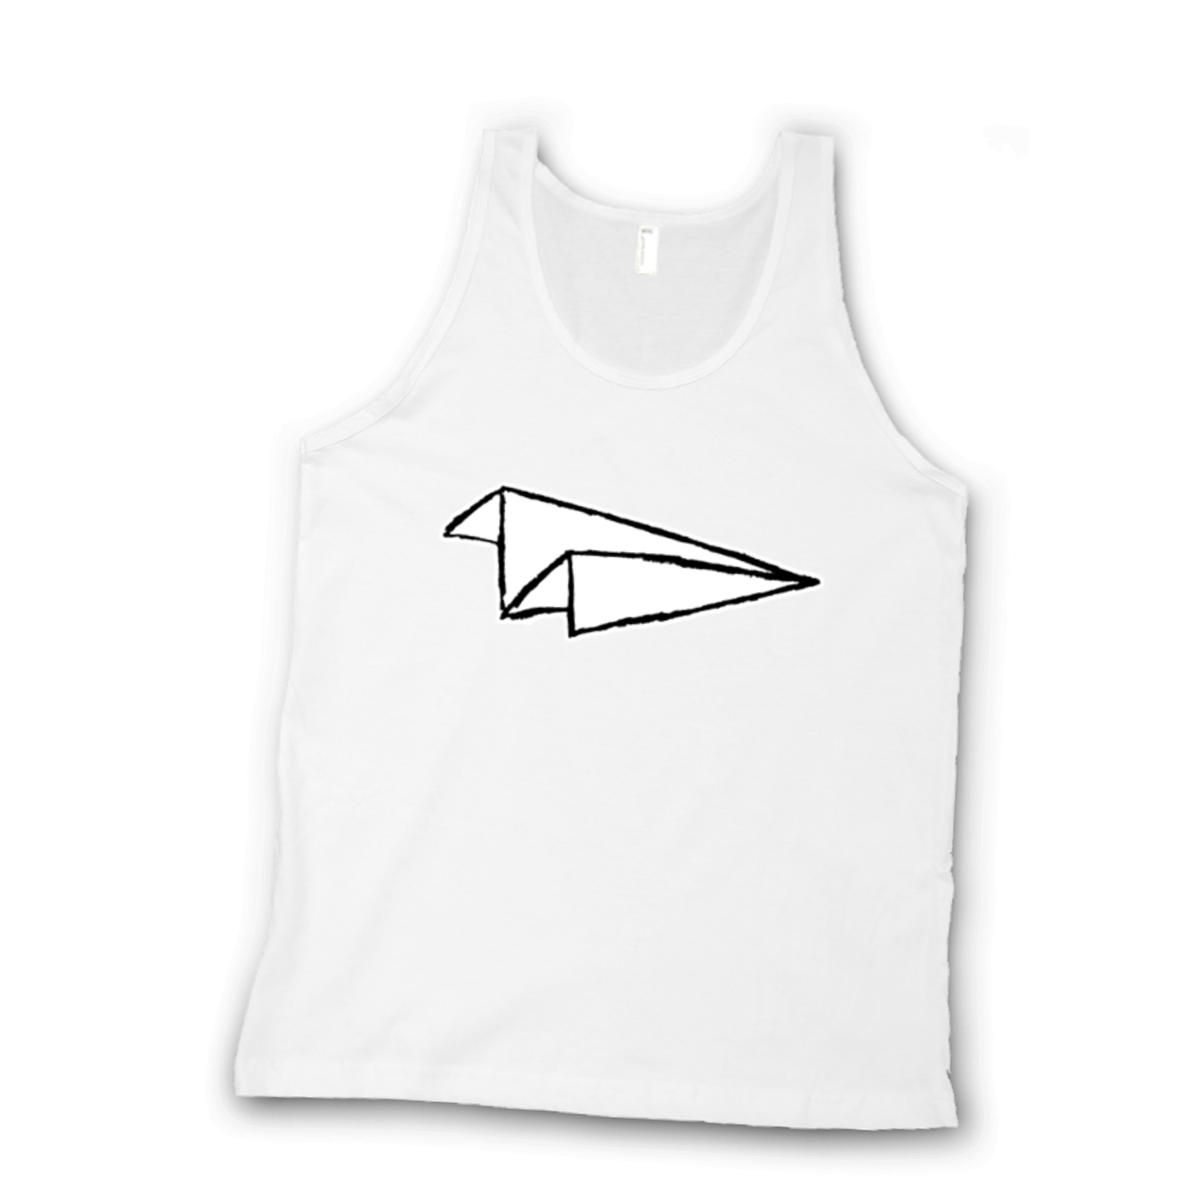 Airplane Sketch Unisex Tank Top Small white